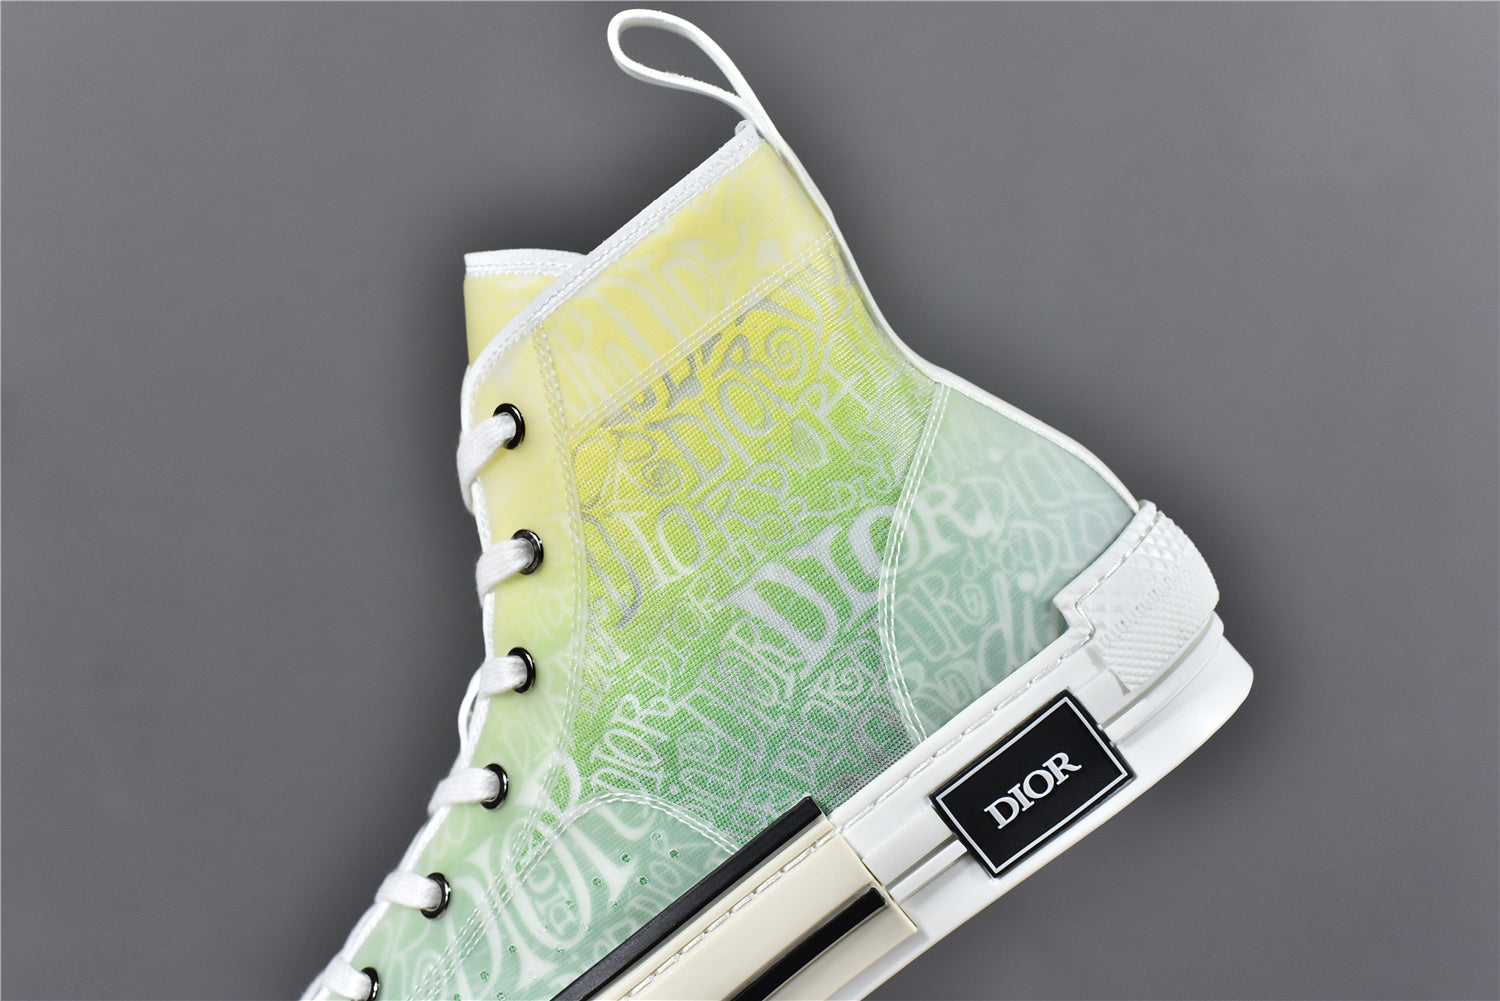 Dior B23 High-Top Sneaker 'Yellow and Green'